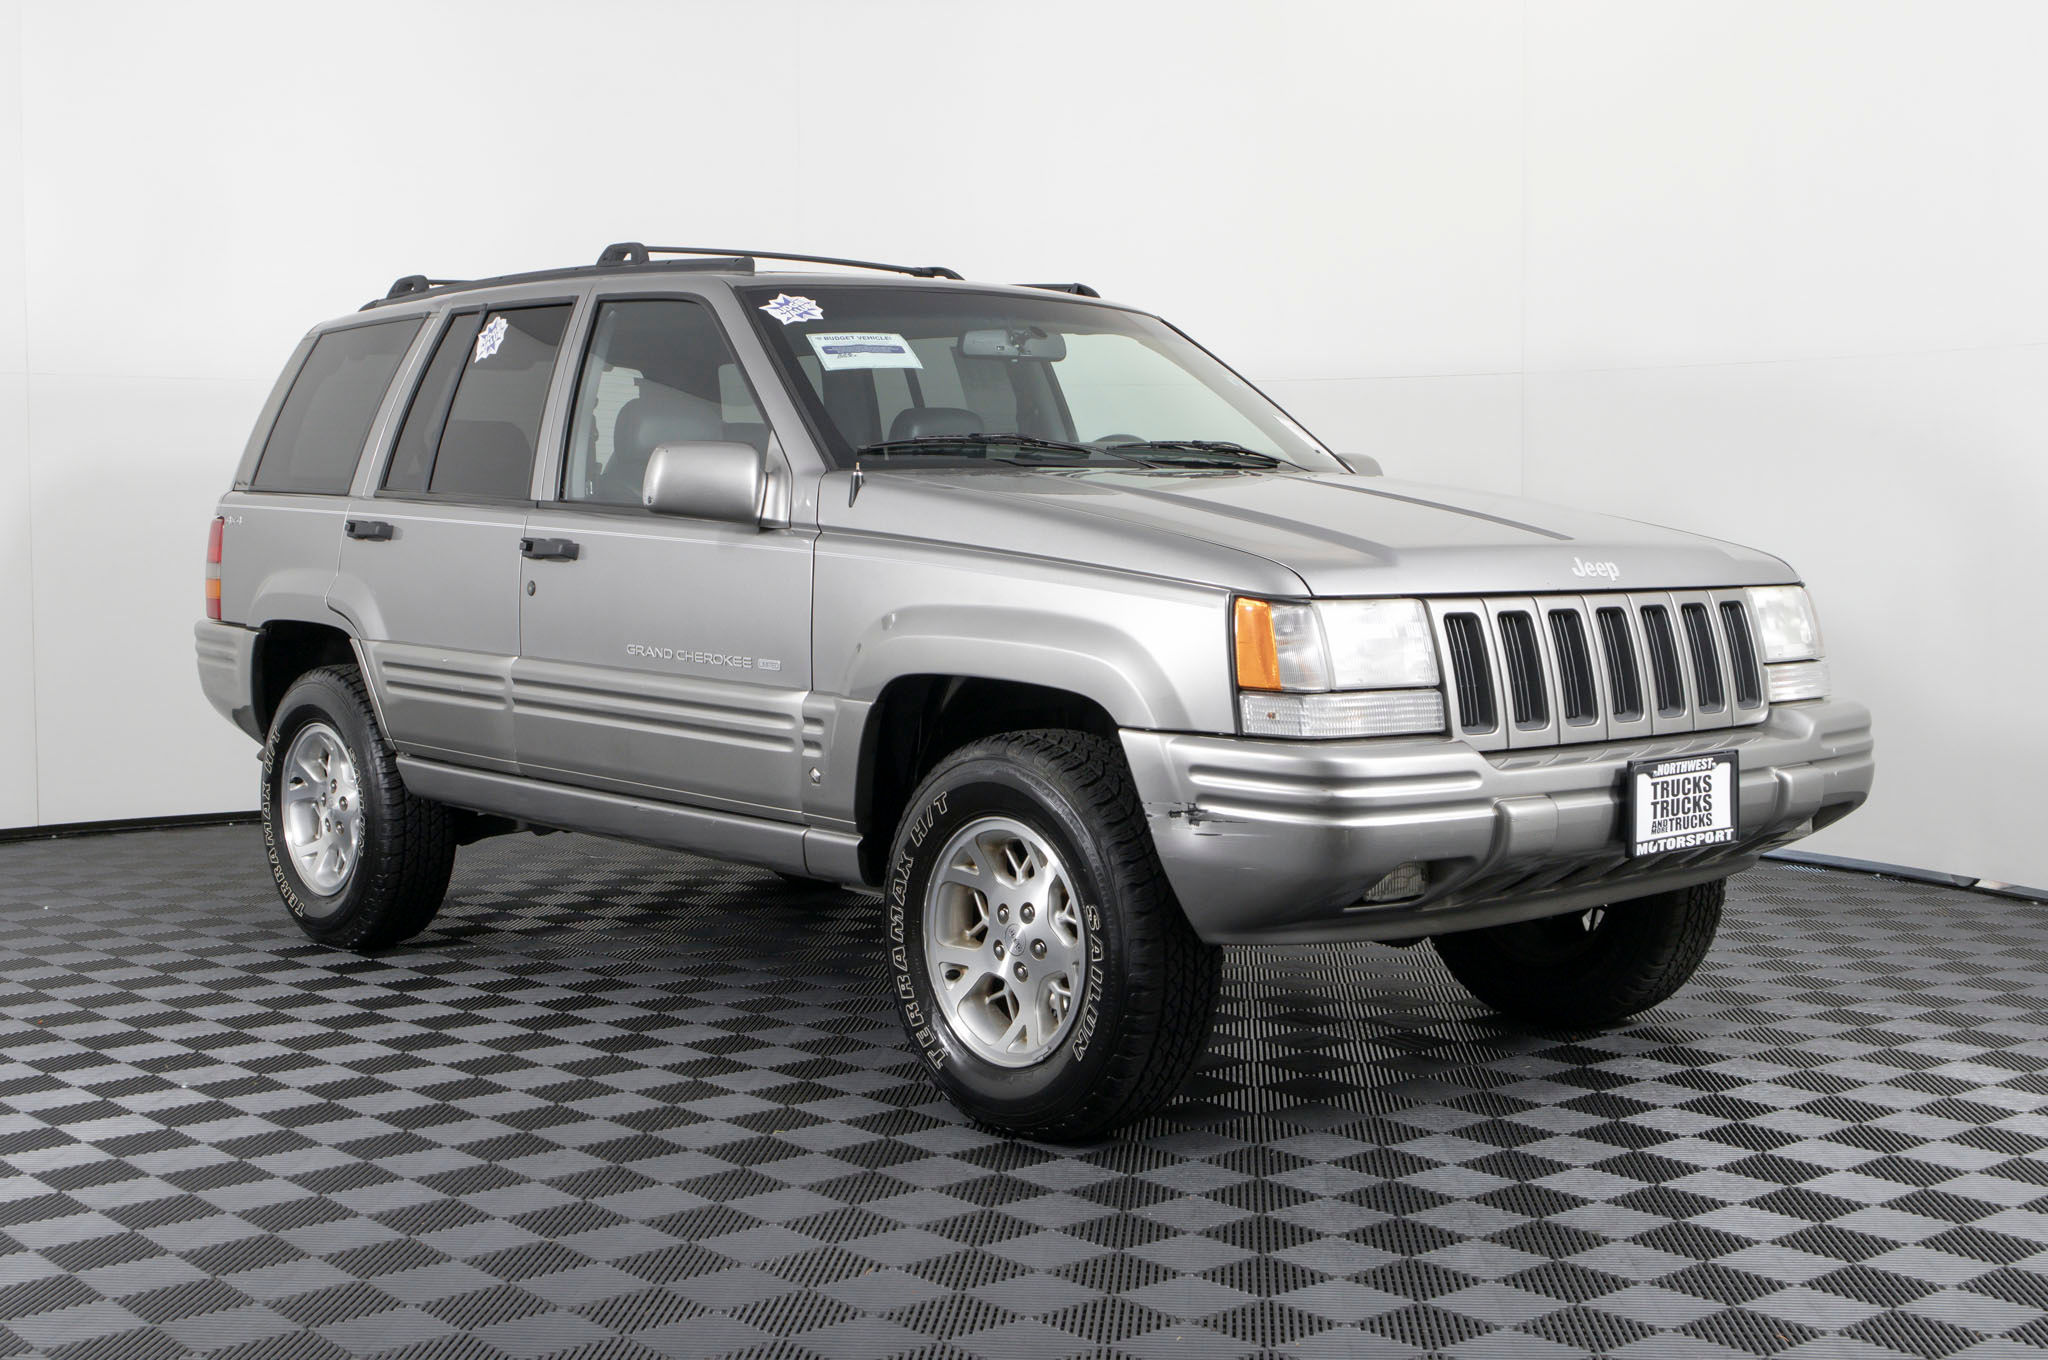 Used 1997 Jeep Grand Cherokee Limited 4x4 SUV For Sale - Northwest  Motorsport